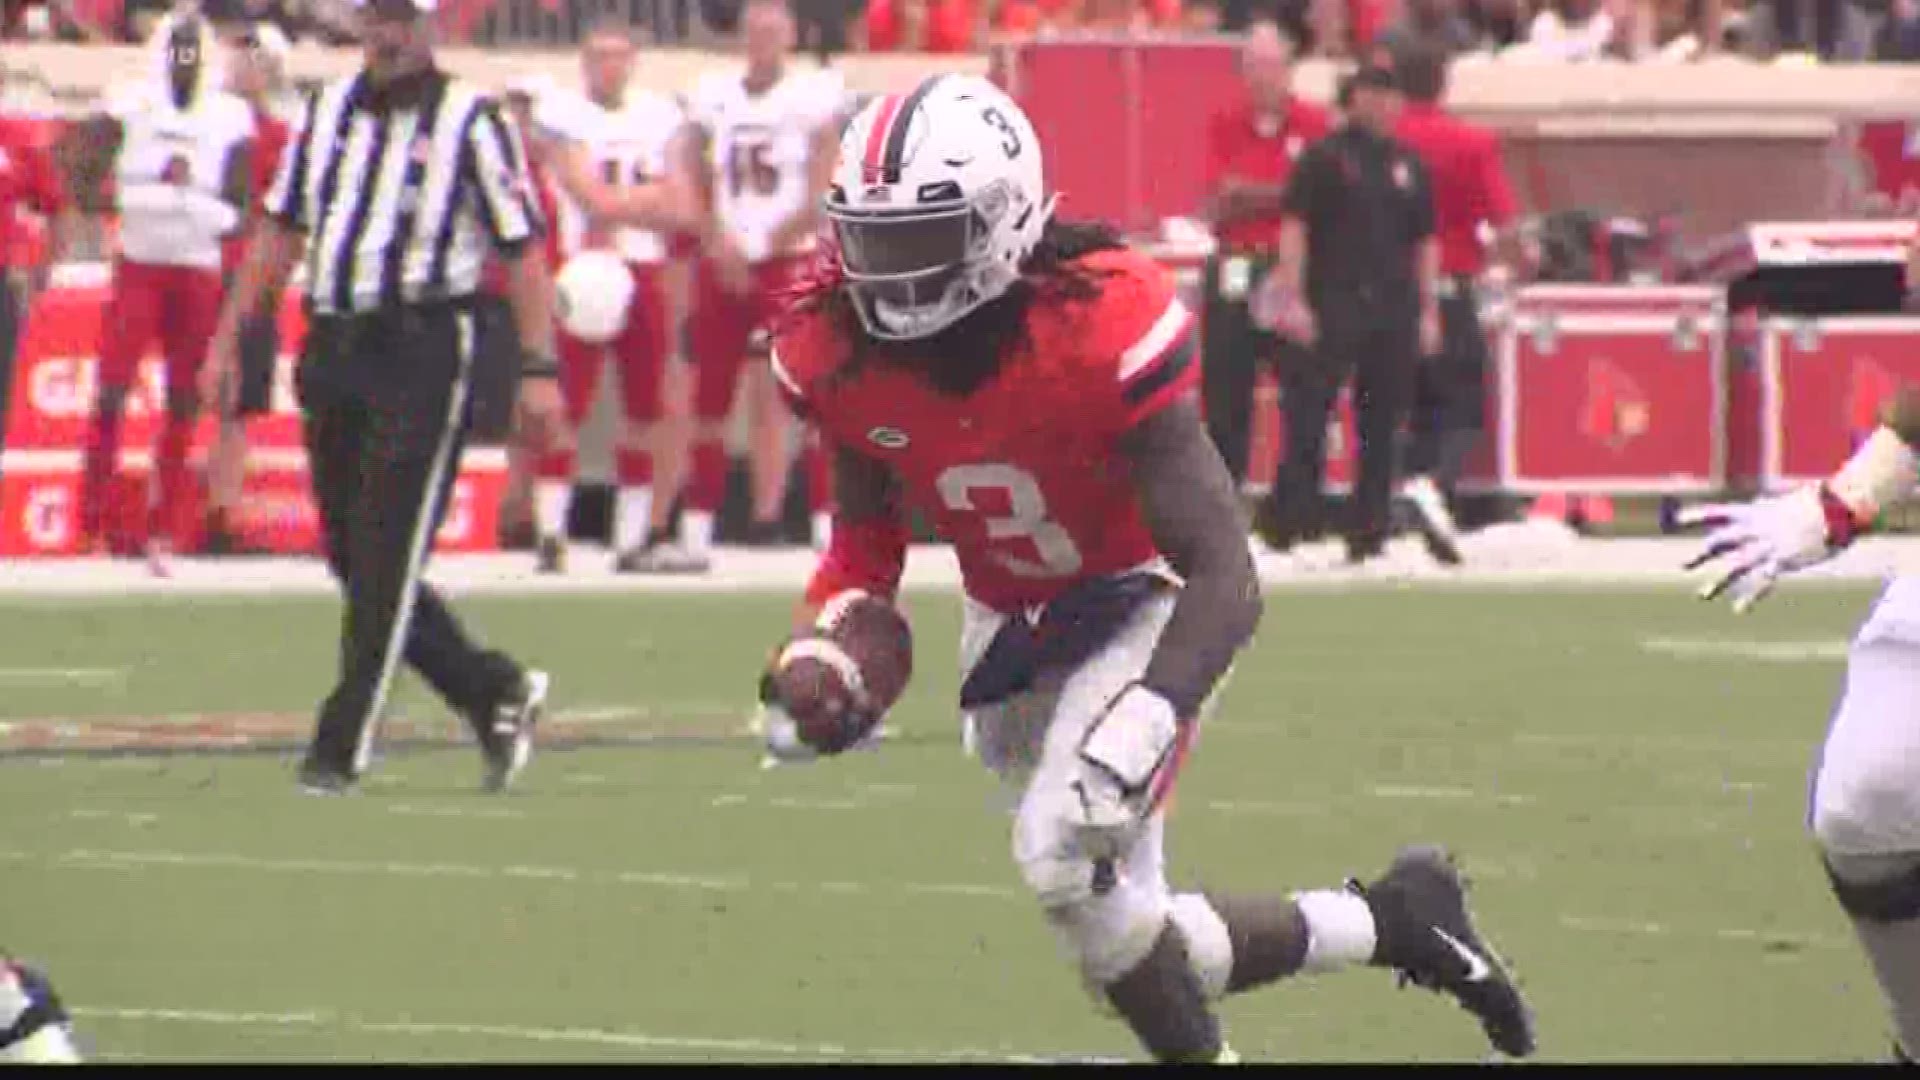 Quarterback, Bryce Perkins becomes the 9th Cavalier to capture the award as they get ready to play in their second straight bowl game on December 29th. They'll face South Carolina in the Belk Bowl.